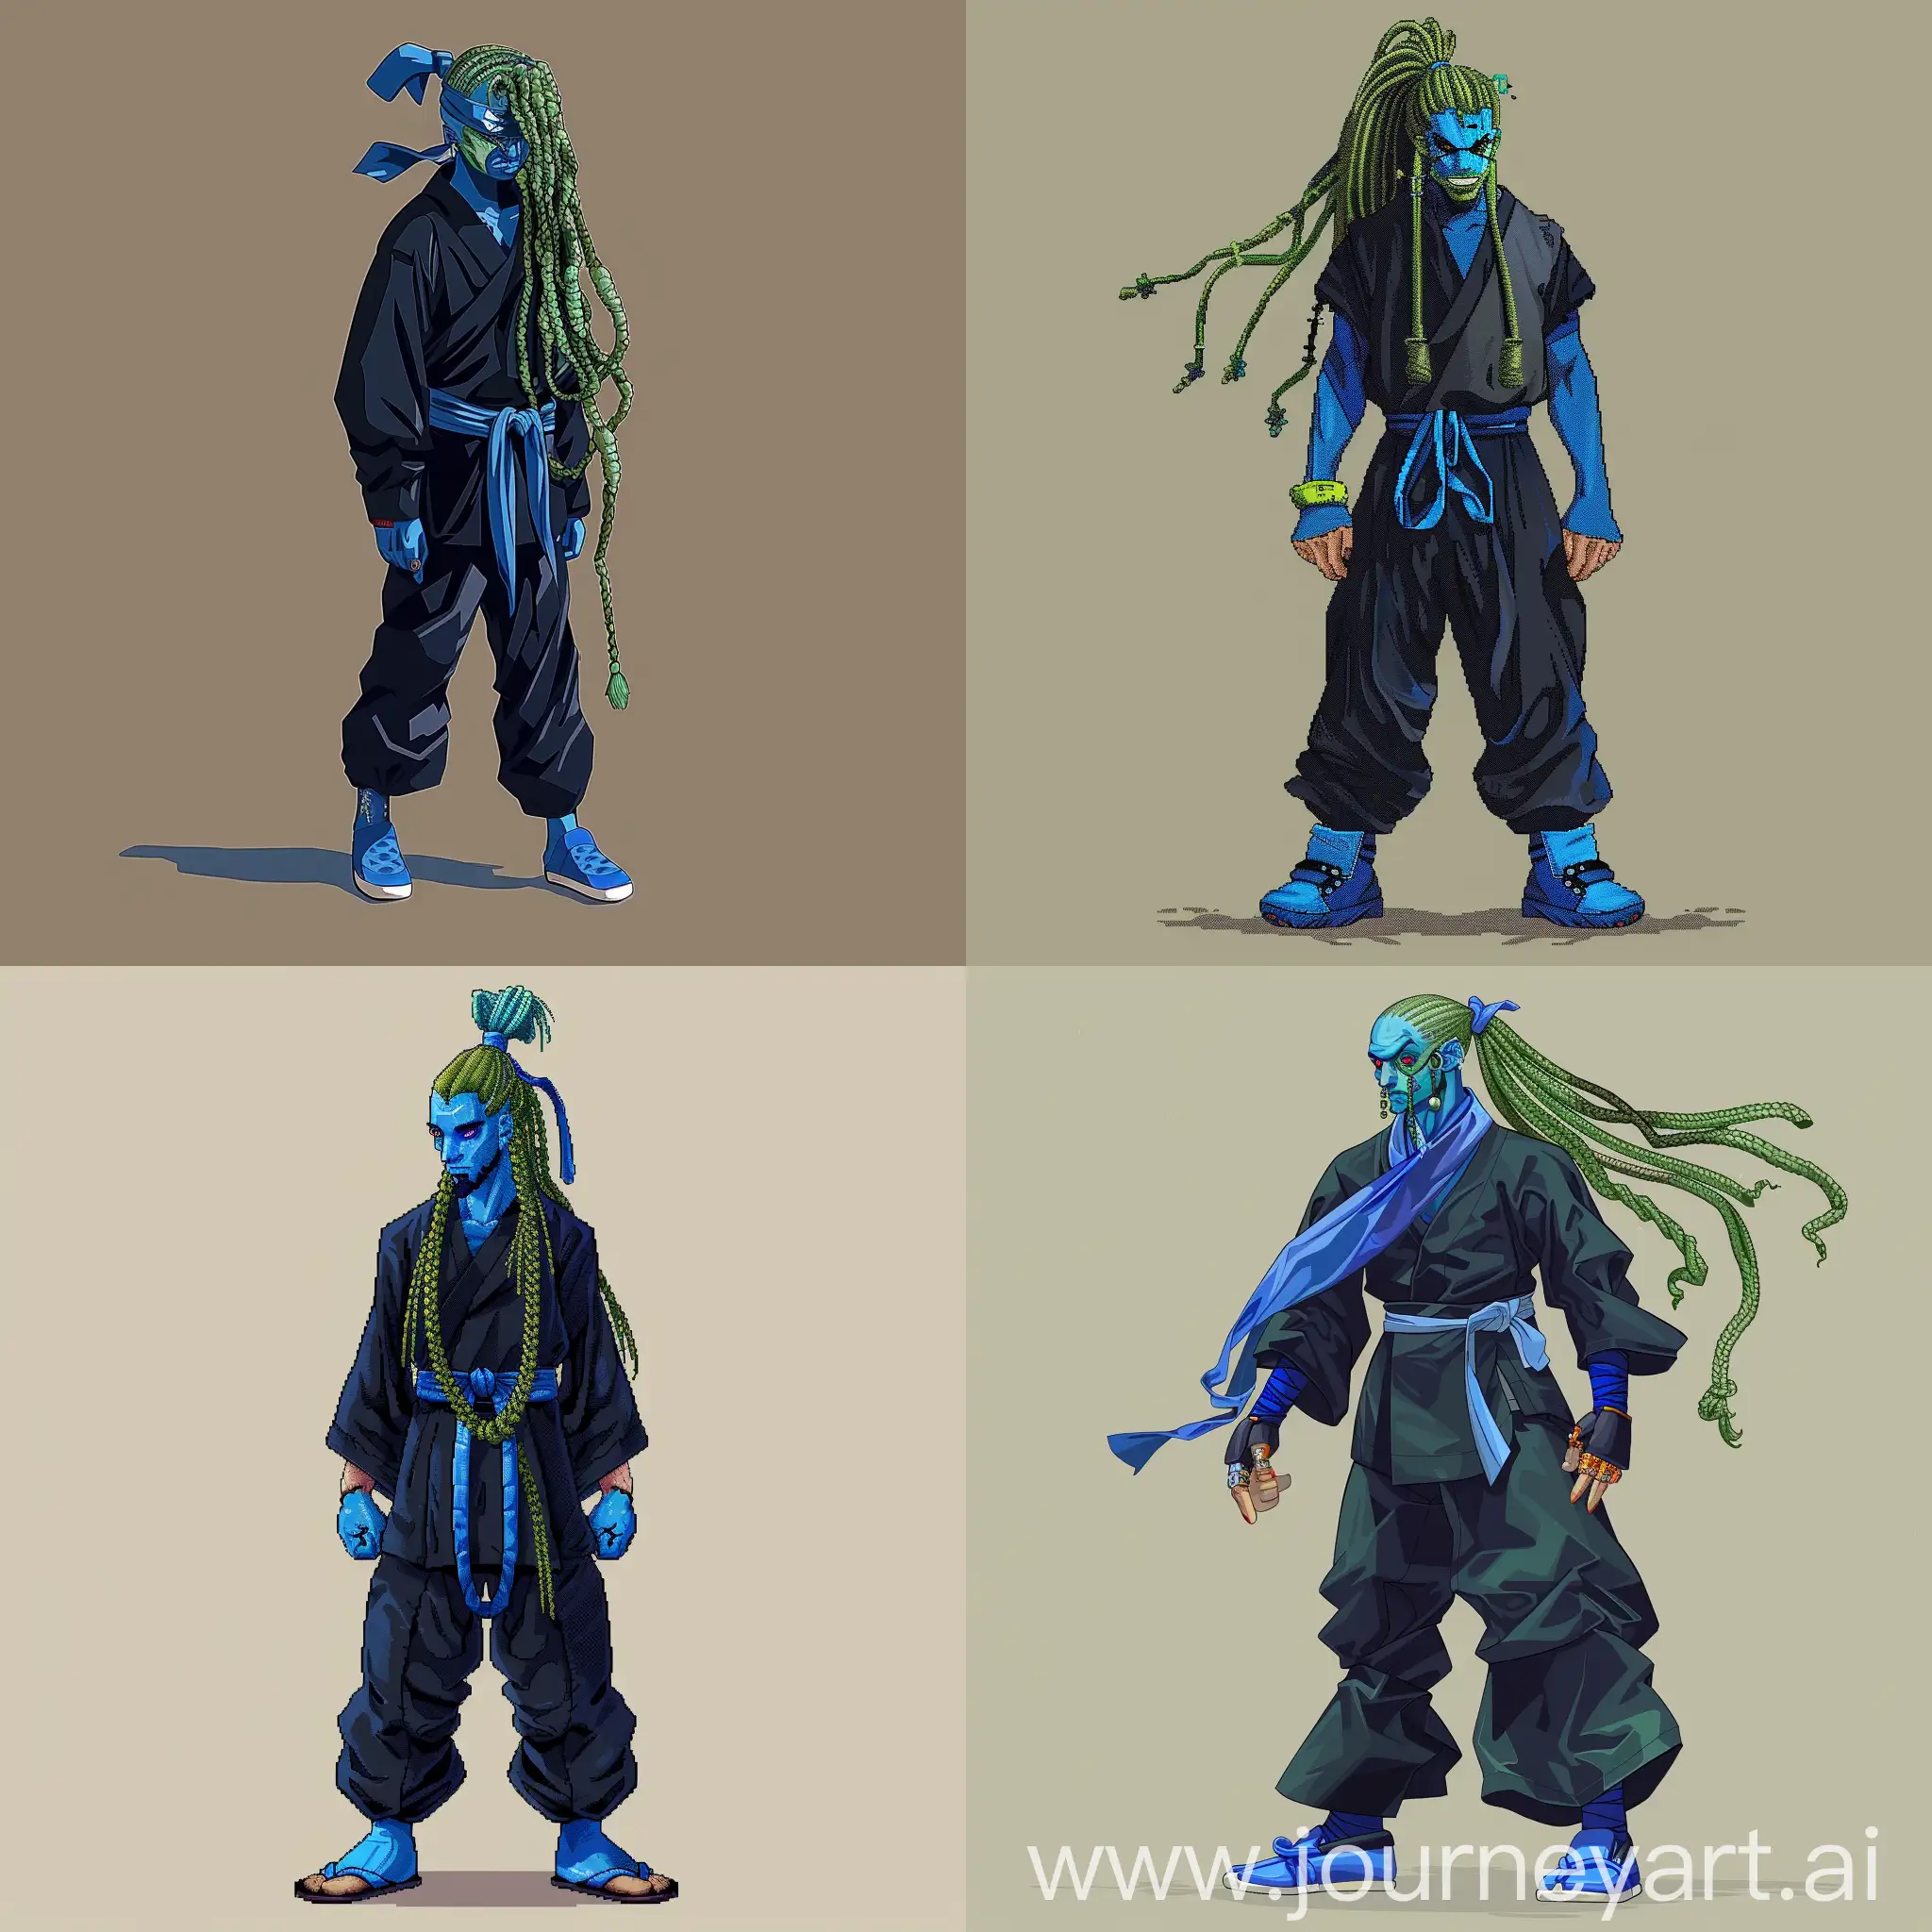 Mystical-BlueSkinned-Man-with-Green-Hair-in-Black-Outfit